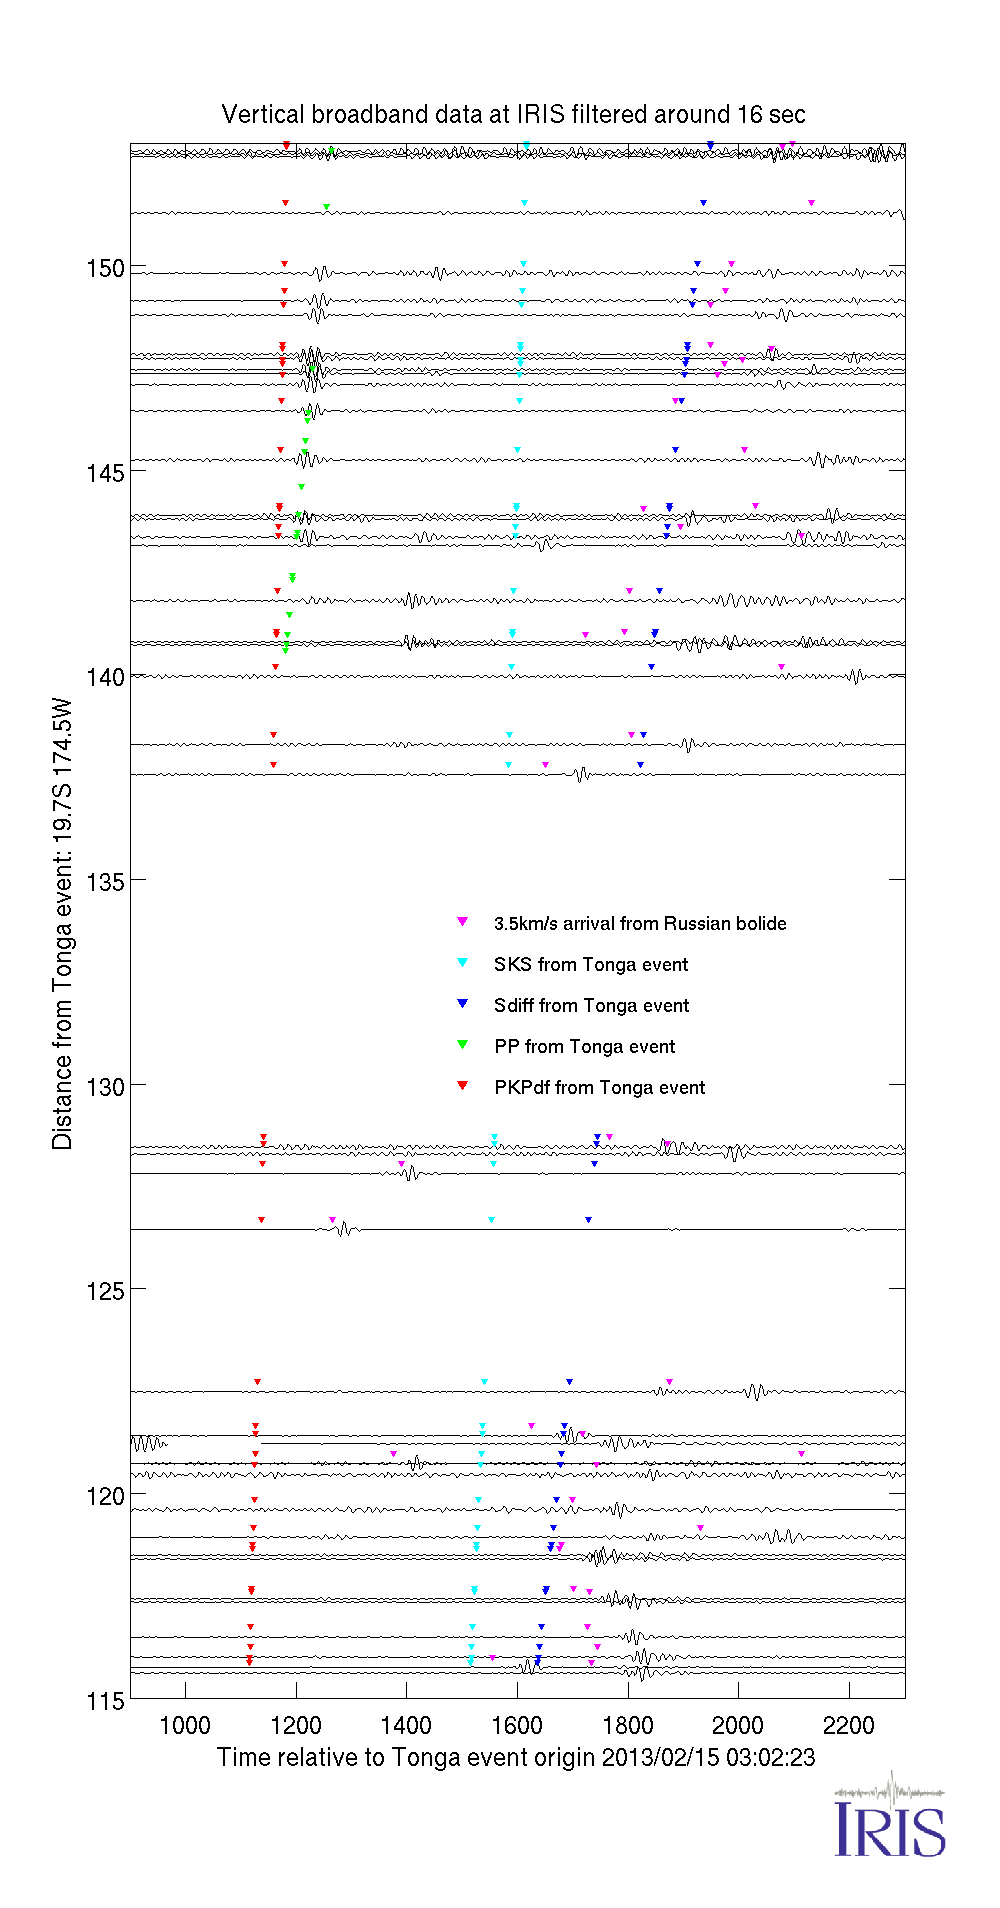 BHZ record sections of data from Tonga event with narrow passband filtering